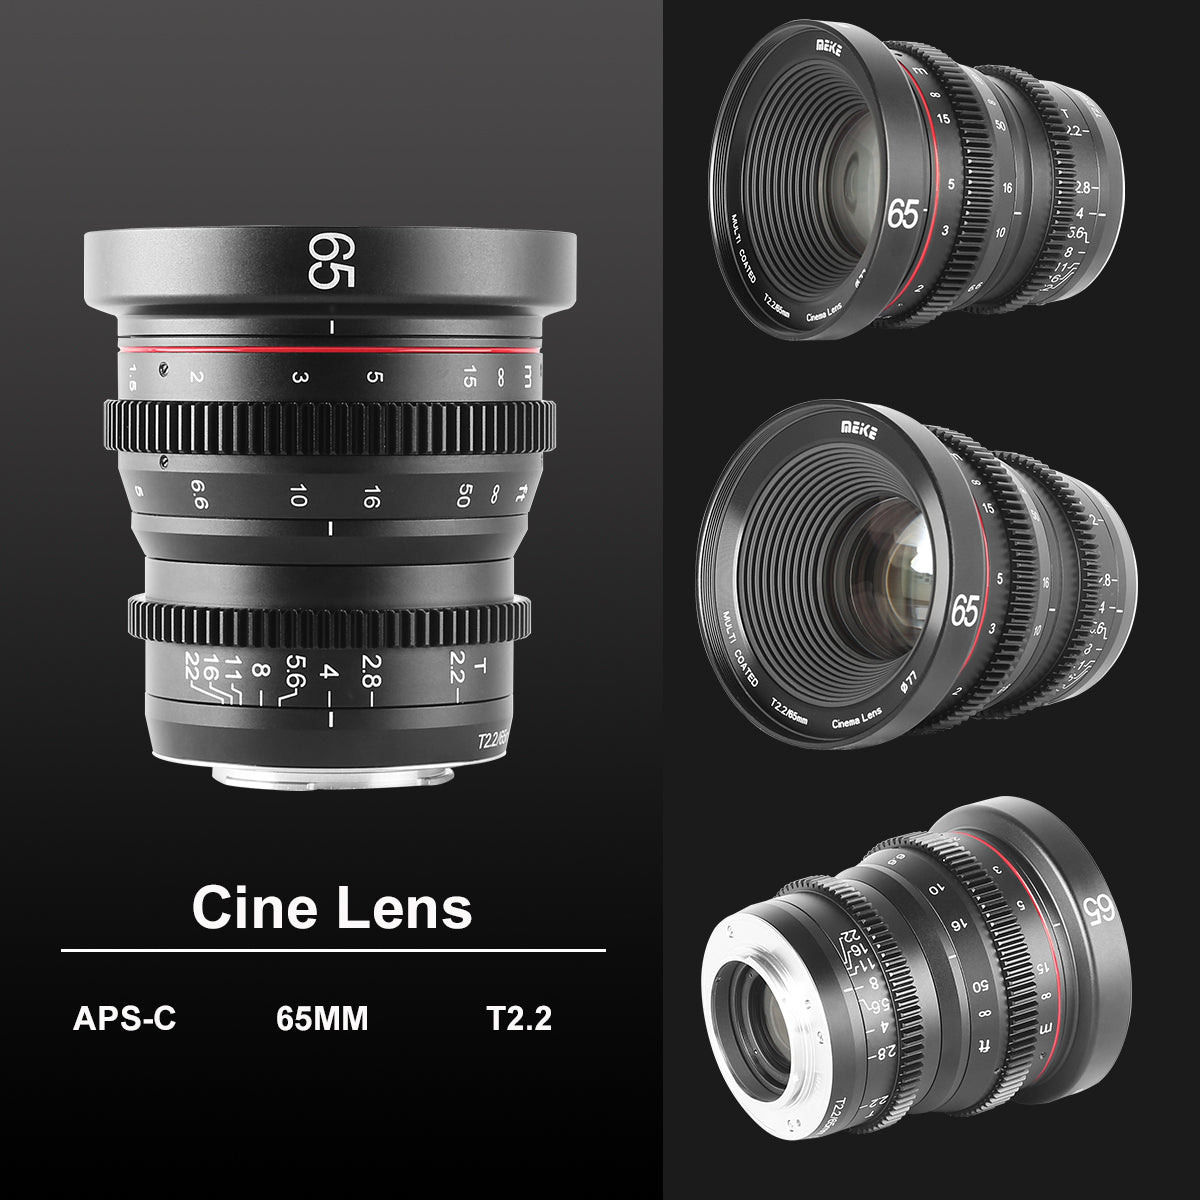 Meike Cinema Prime 65mm T2.2 Lens (Fujifilm X Mount) in Different Perspectives